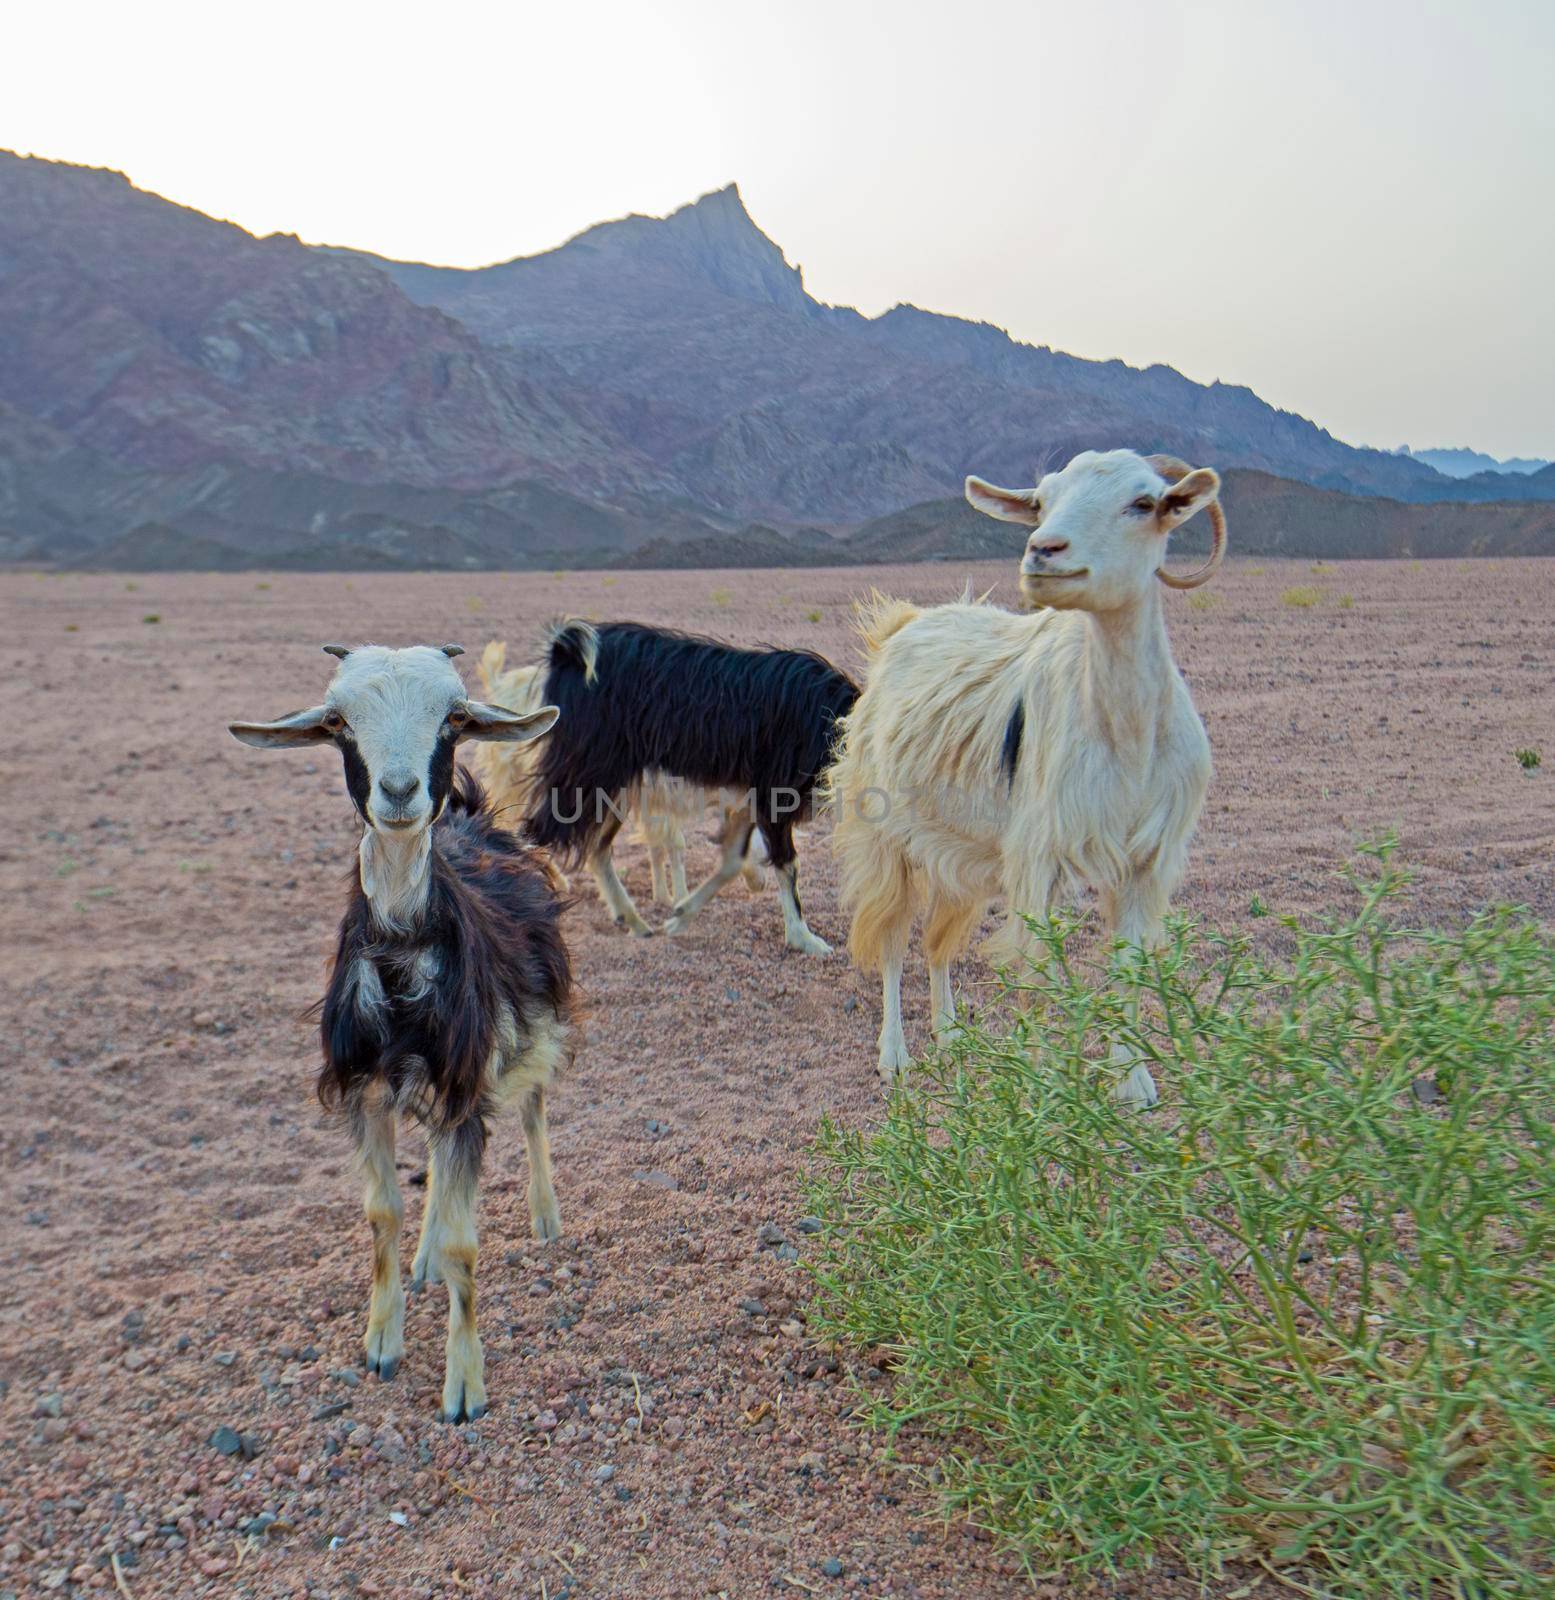 Landscape scenic view of desolate barren eastern desert in Egypt with herd of Sahelian Peulh goats and mountains